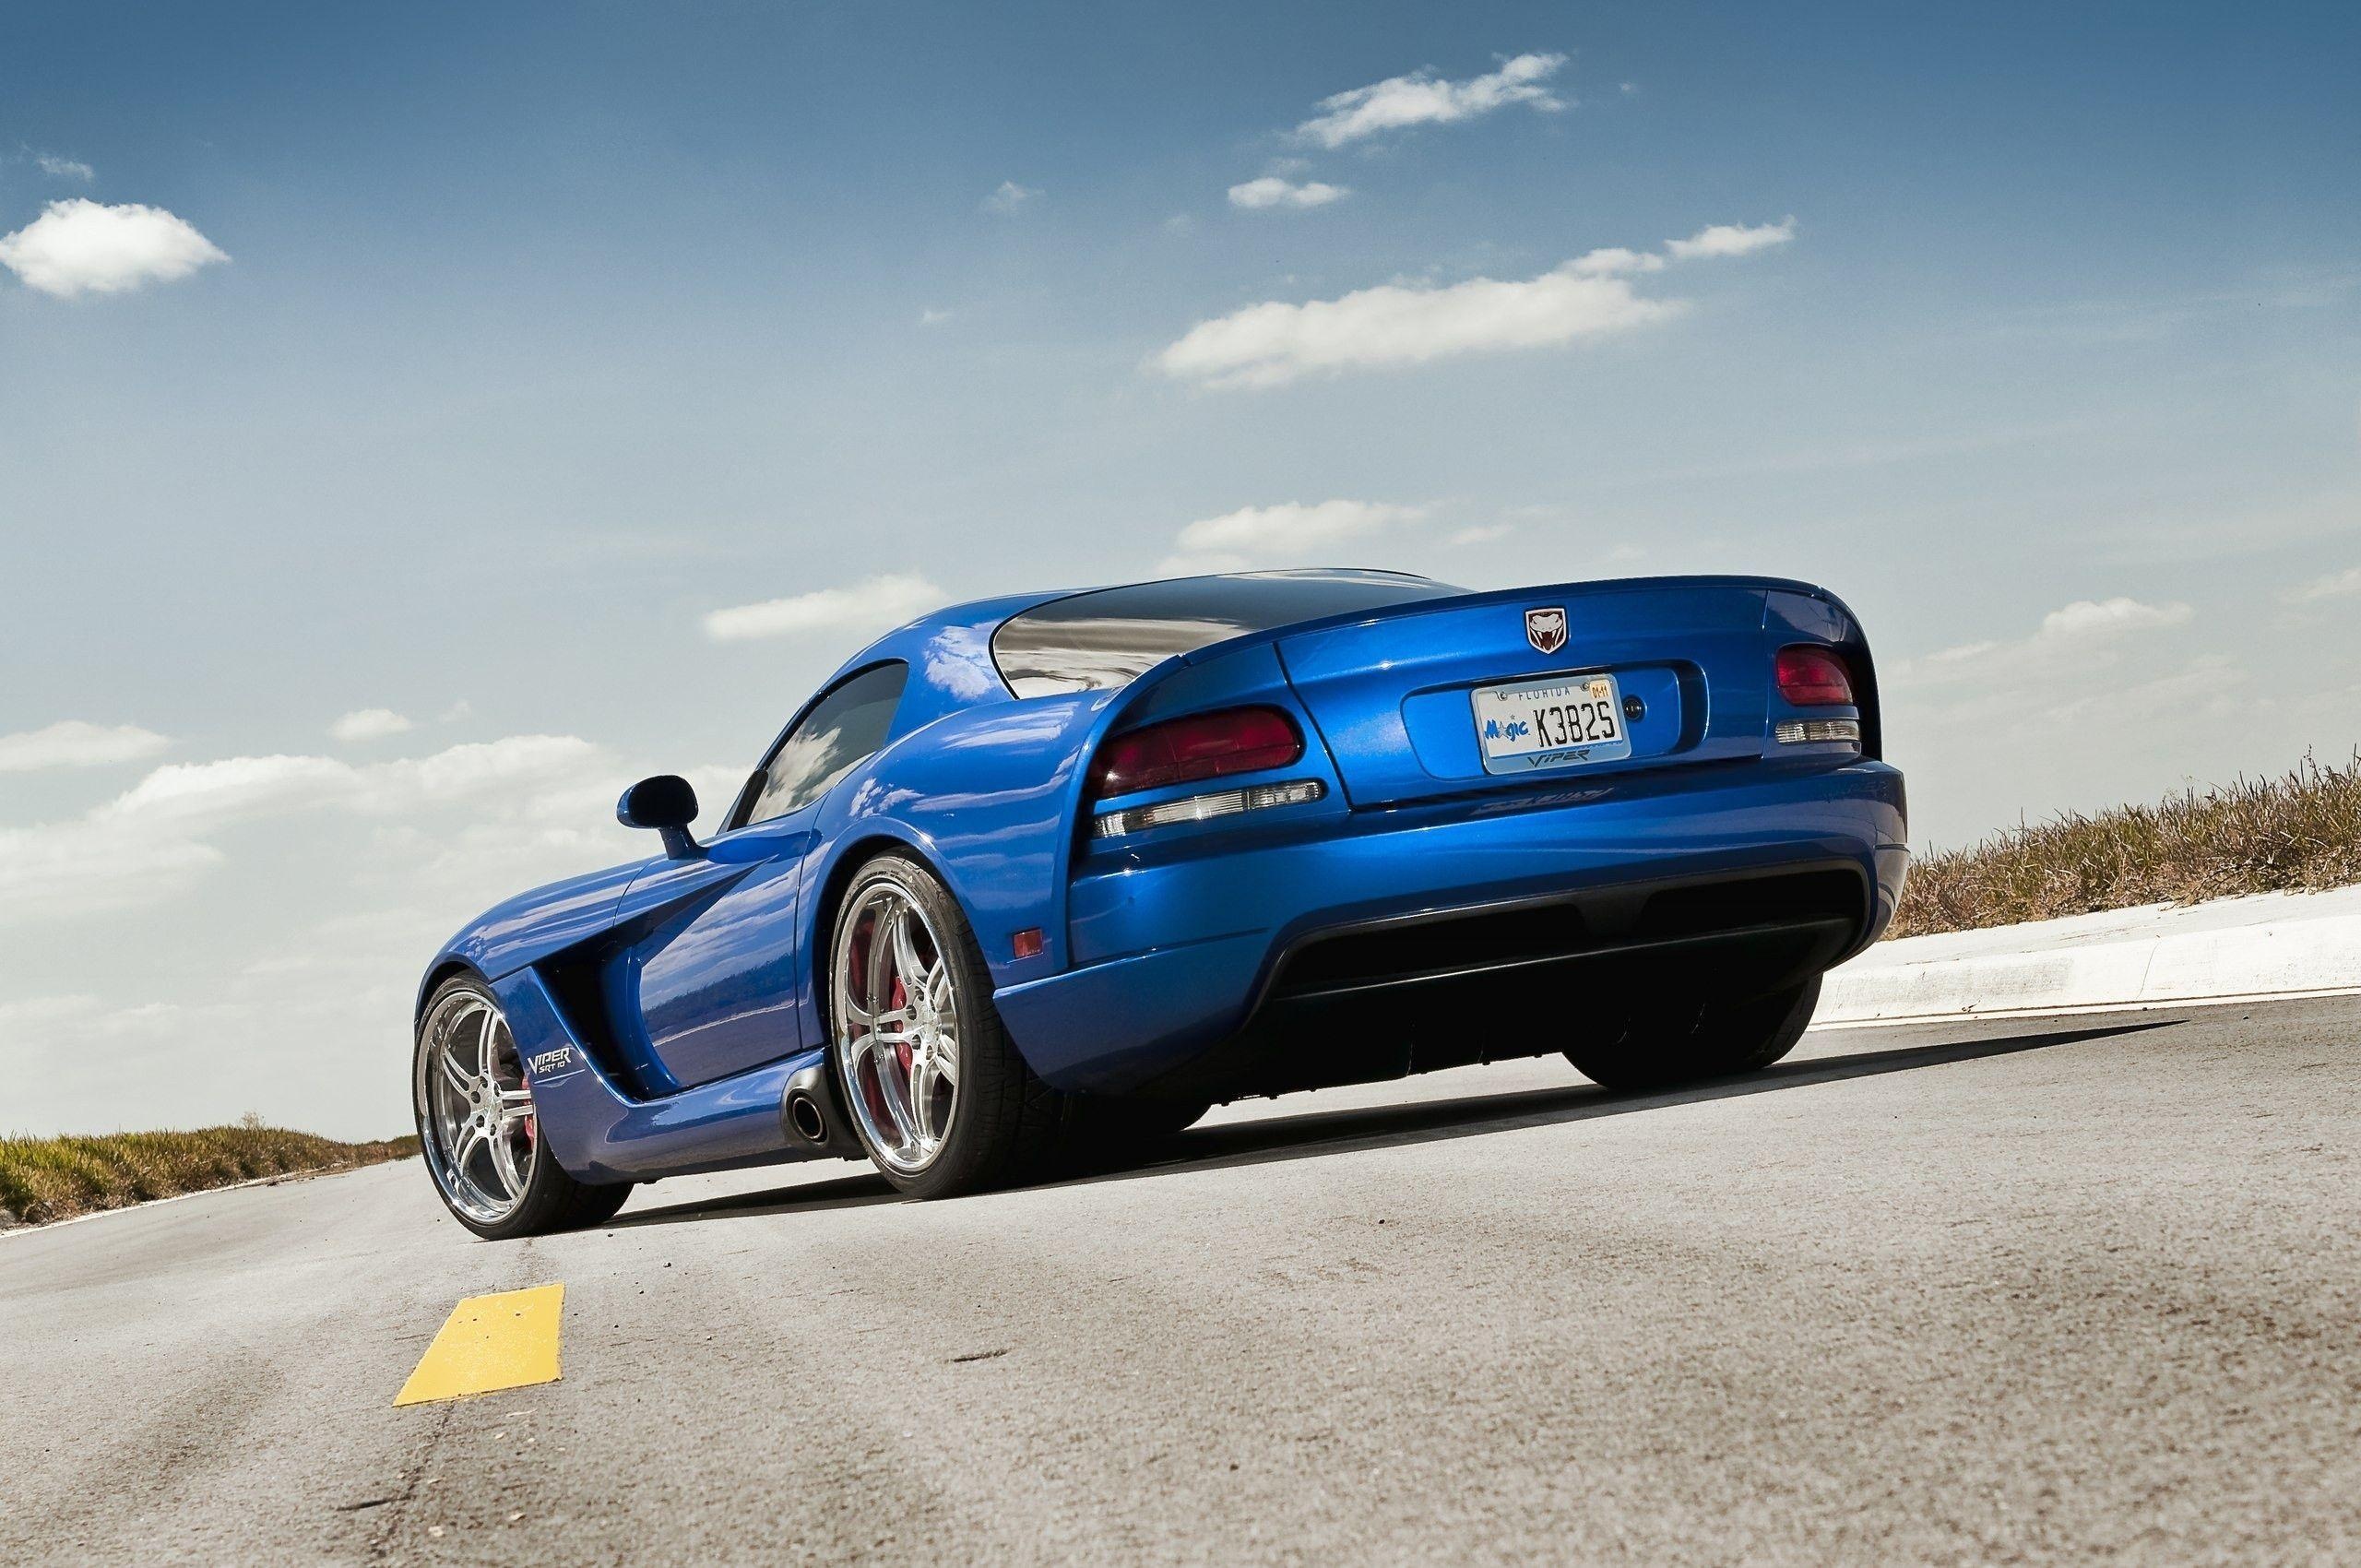 Dodge Viper, Automotive excellence, Jaw-dropping power, Dynamic performance, 2560x1700 HD Desktop